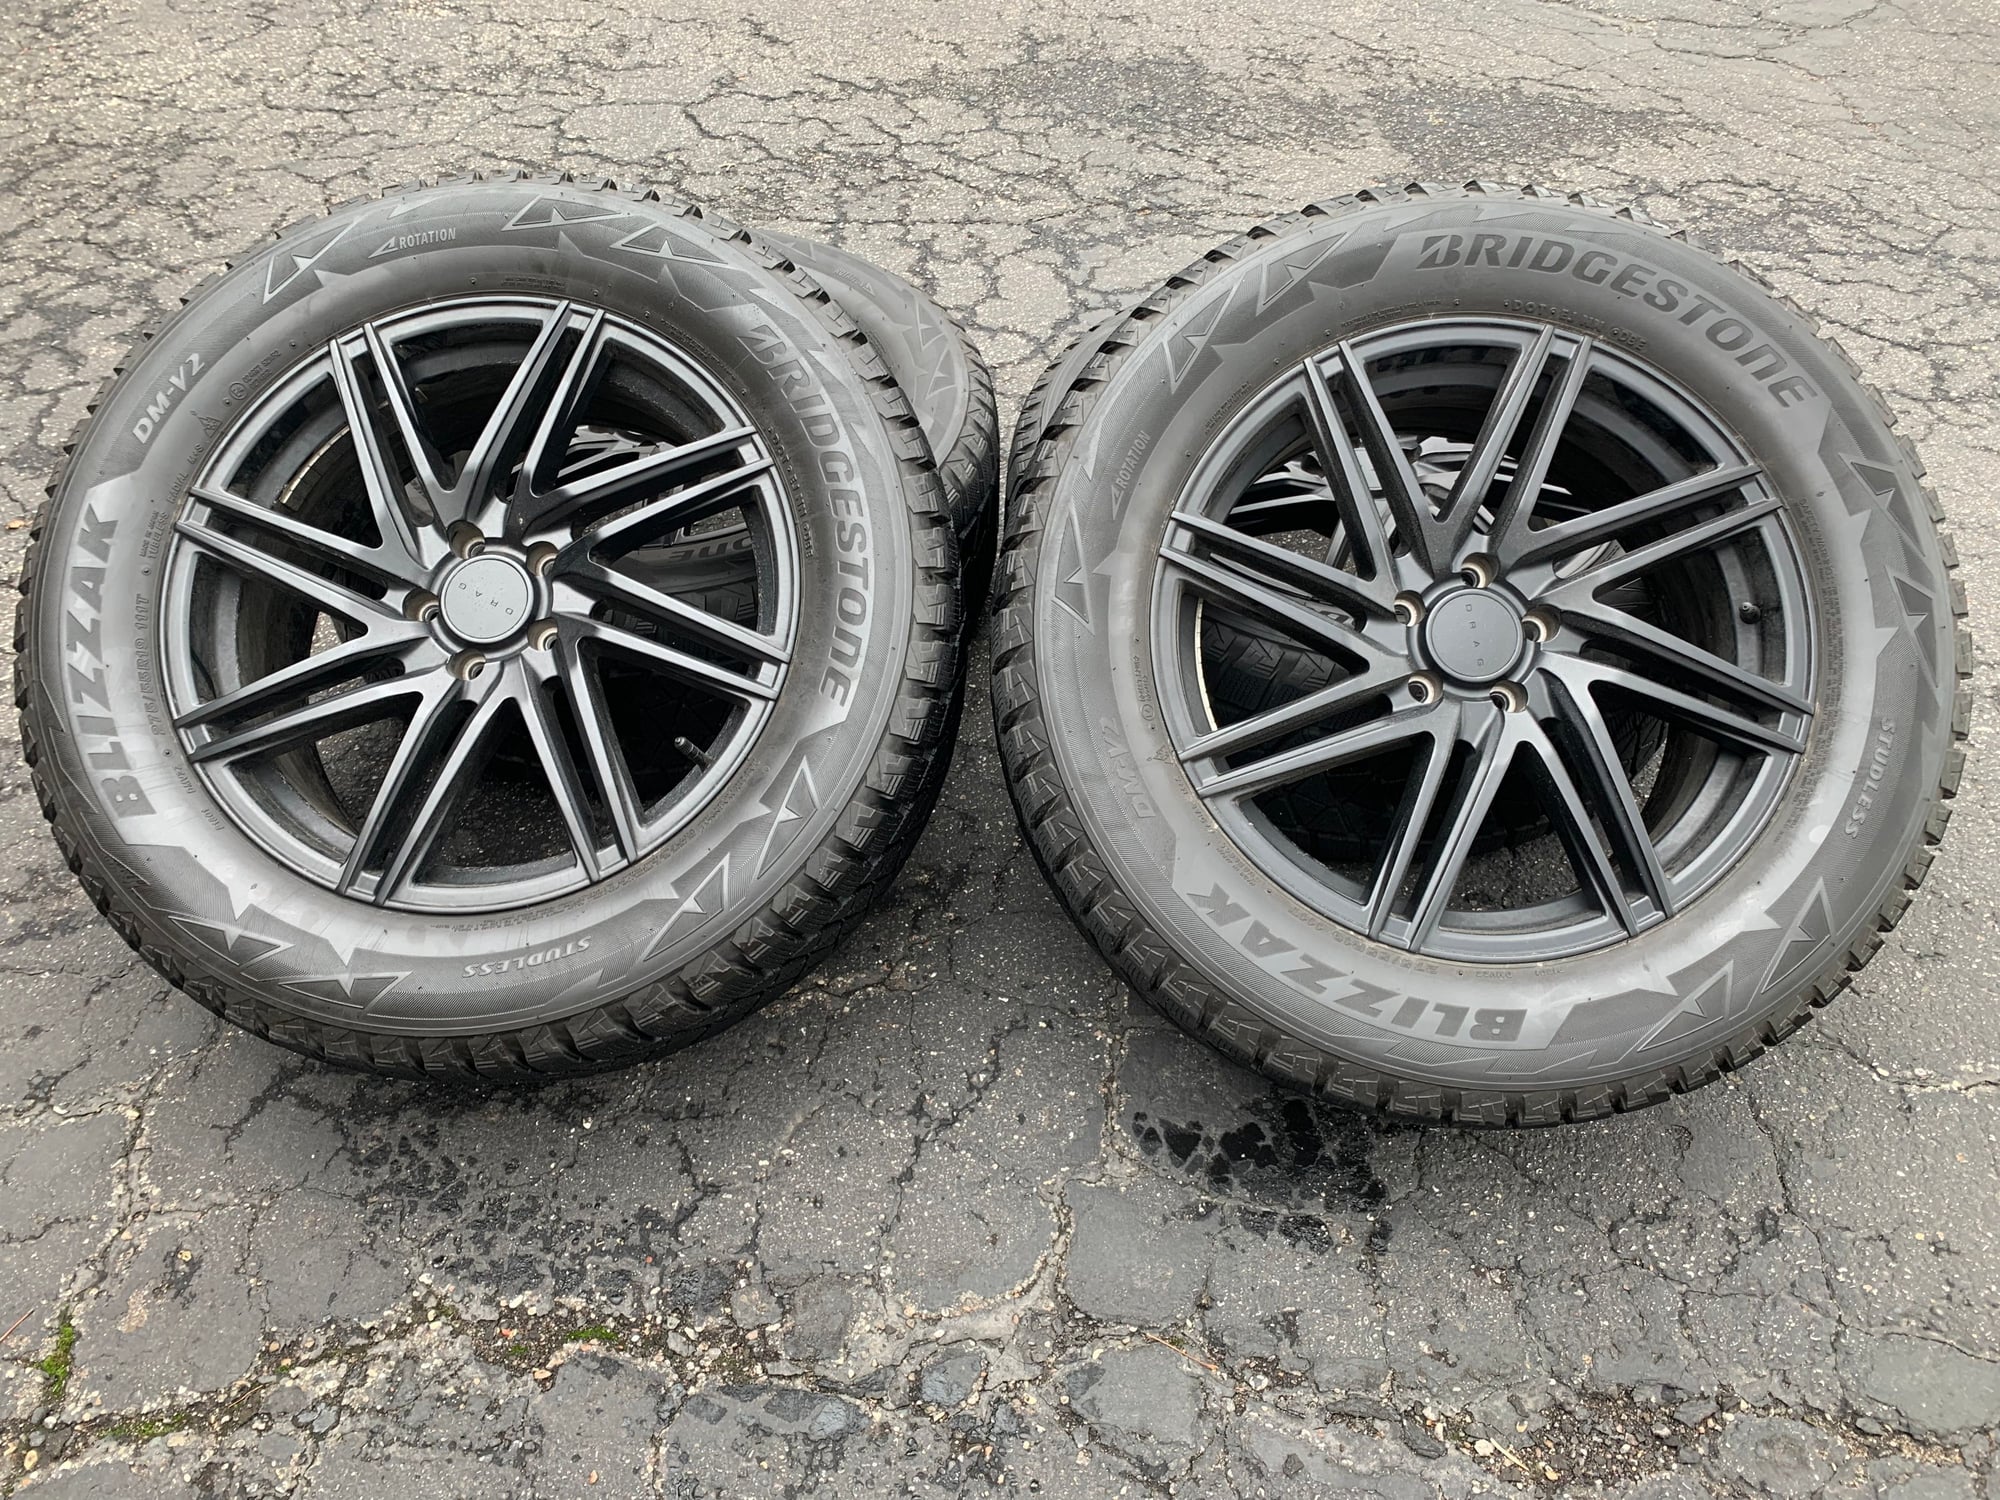 Wheels and Tires/Axles - FS: Winter tire and wheel combo - Used - 2010 to 2022 Mercedes-Benz GL450 - Minneapolis, MN 55439, United States